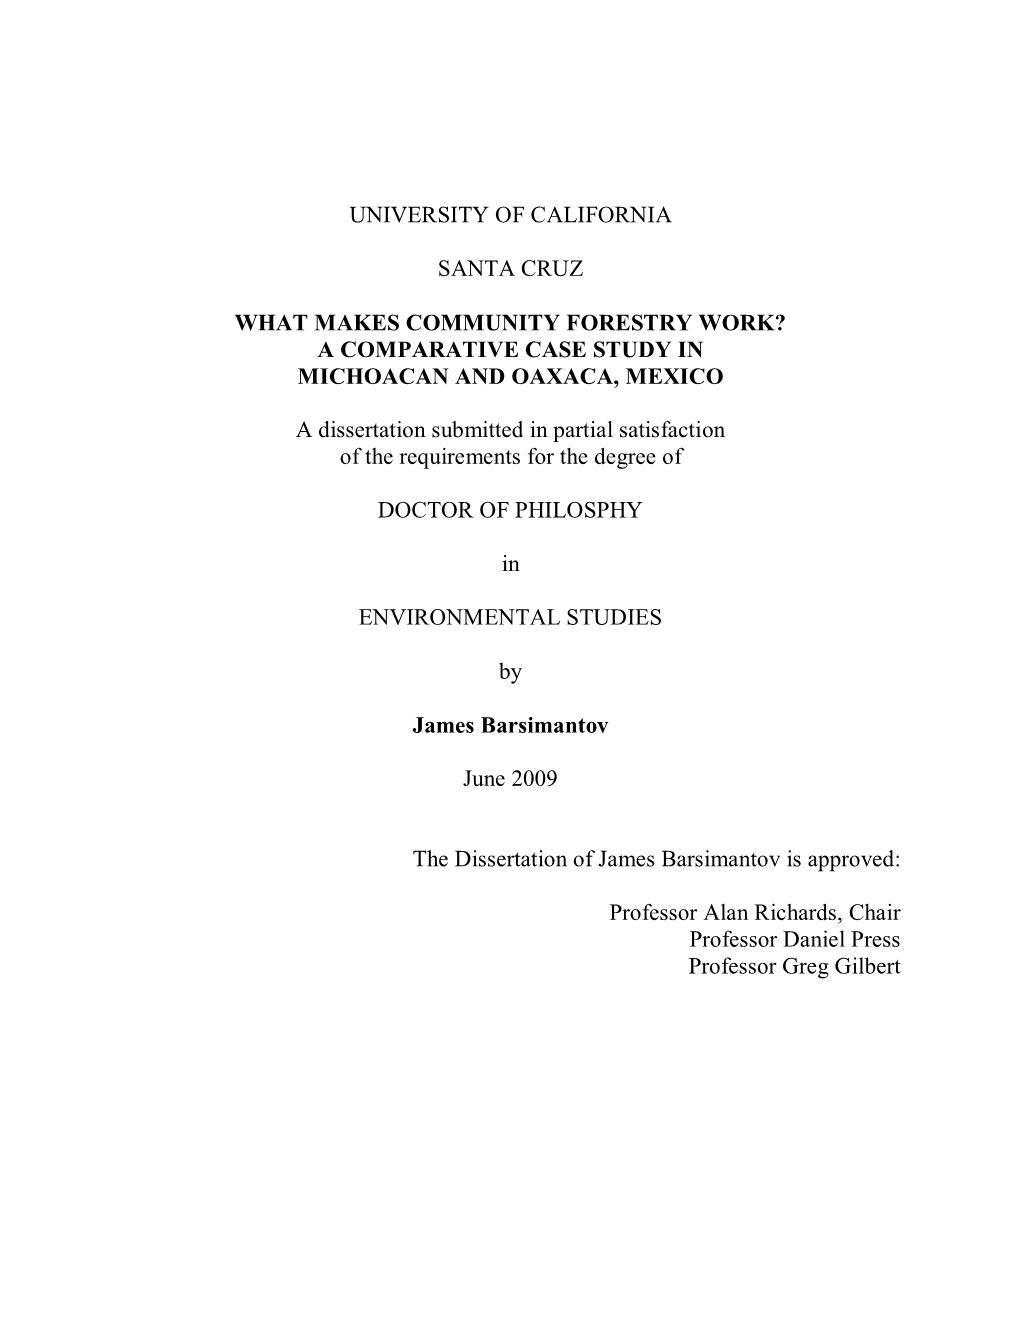 University of California Santa Cruz What Makes Community Forestry Work? a Comparative Case Study in Michoacan and Oaxaca, Mexi